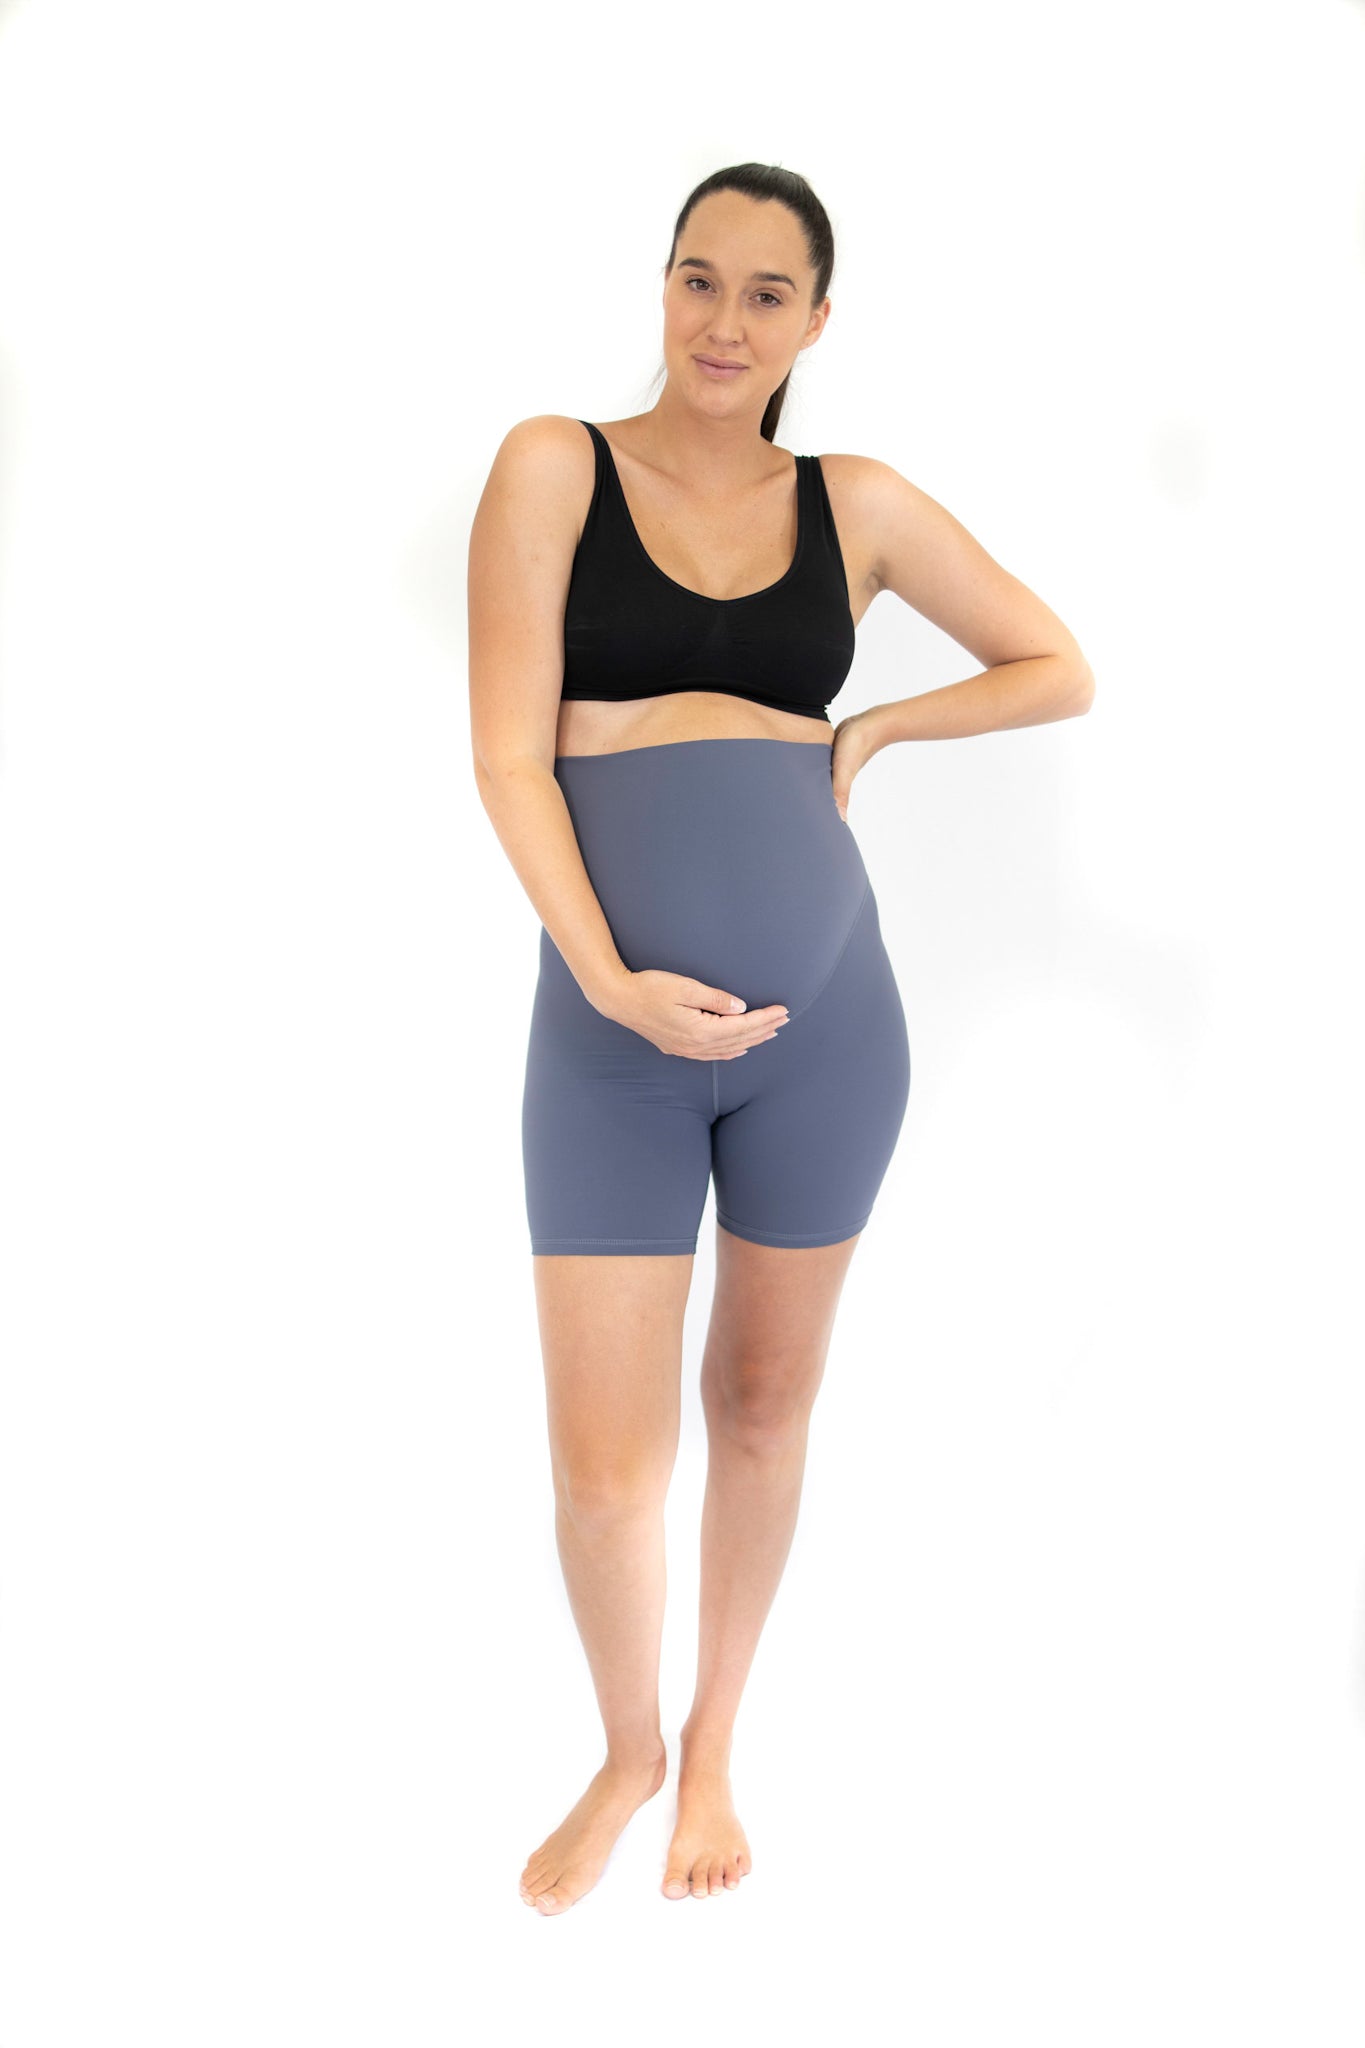 Thighs Disguise Maternity Support Shorts, Belly Bandit